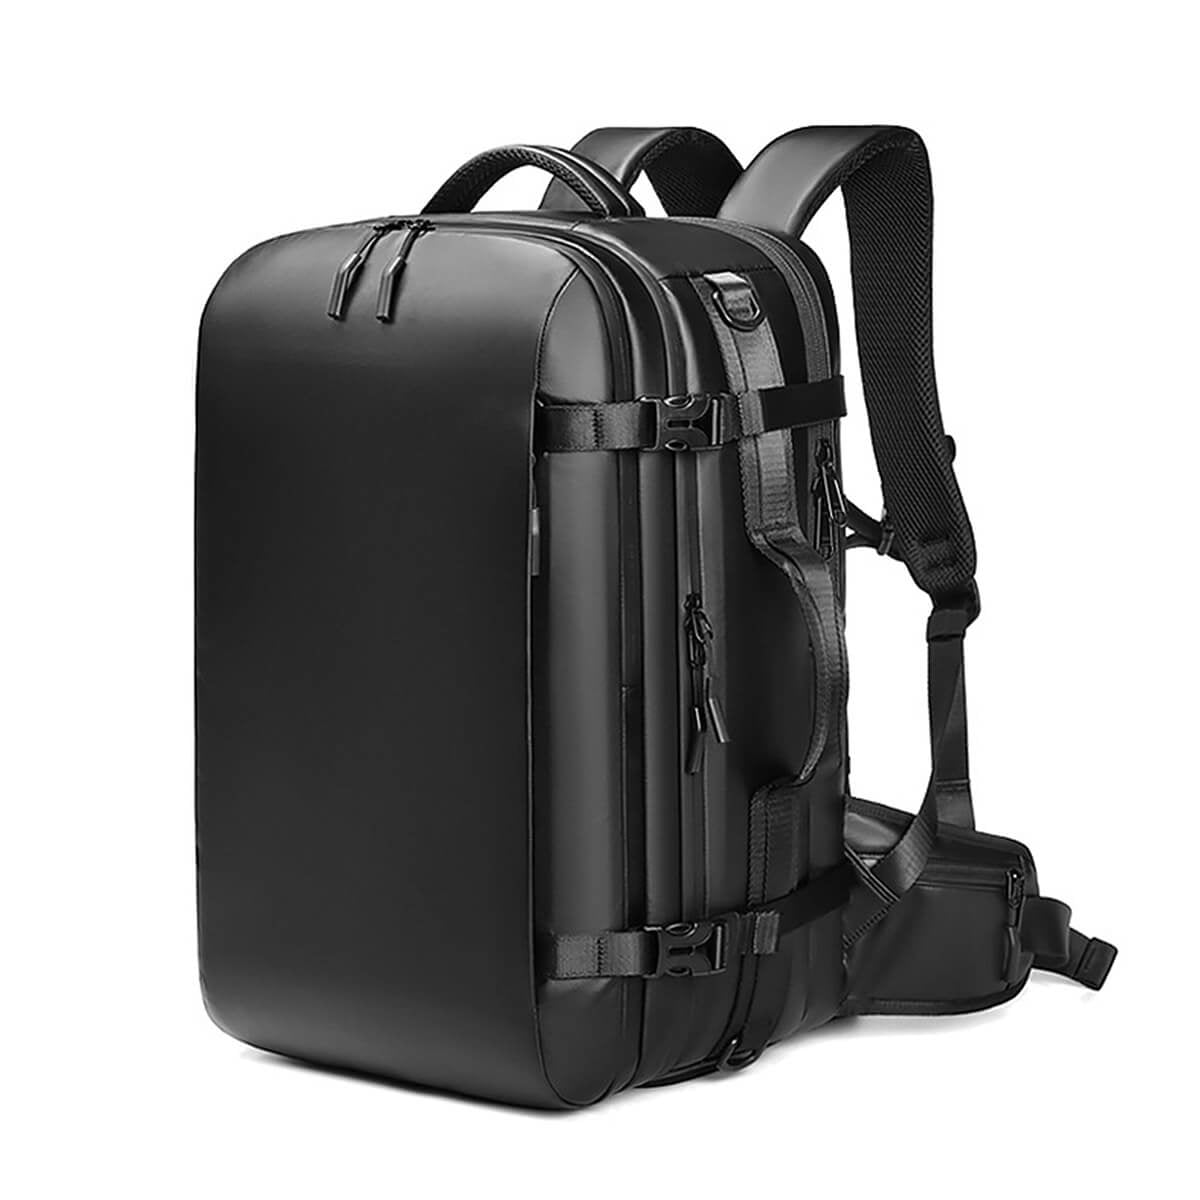 Dell Premier Slim Laptop Backpack 15 Pe1520ps With Water Resistant Exterior  And Eva Foam Cushioning at Rs 4499/piece | वॉटरप्रूफ लैपटॉप बैग in Lucknow  | ID: 24606293633